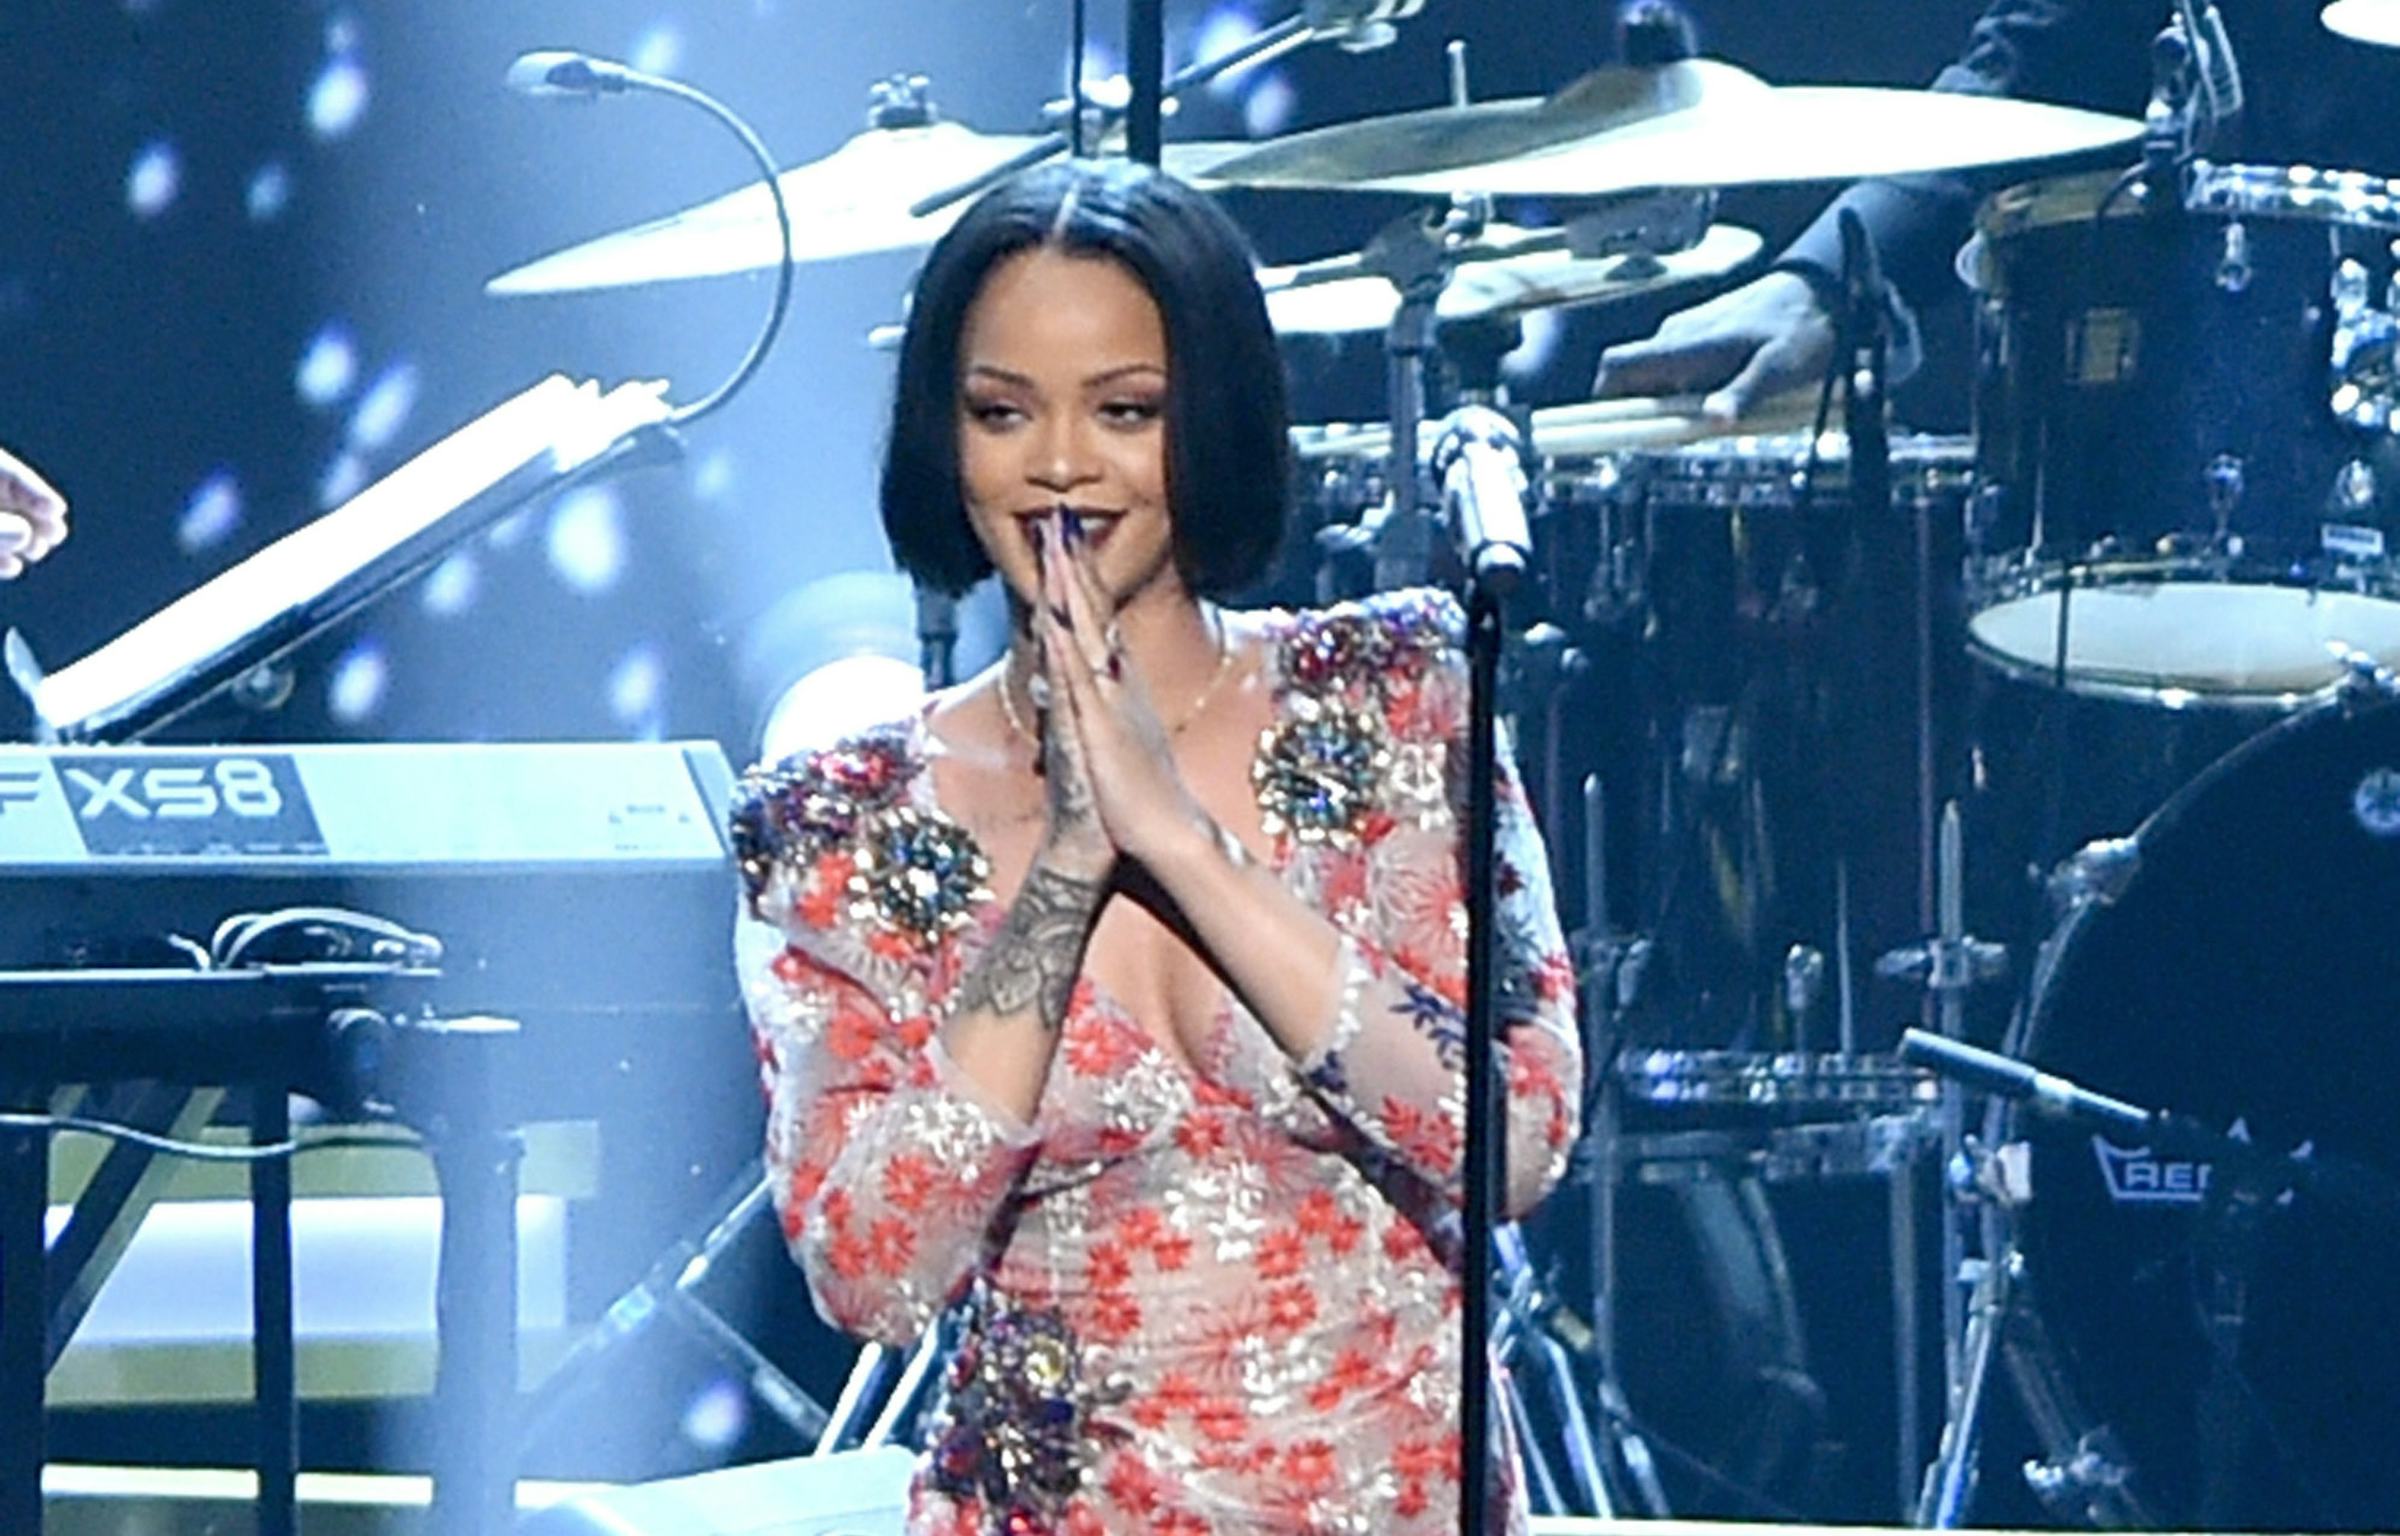 Rihanna Handed Her Mic To A Fan, And His Voice Stunned Her